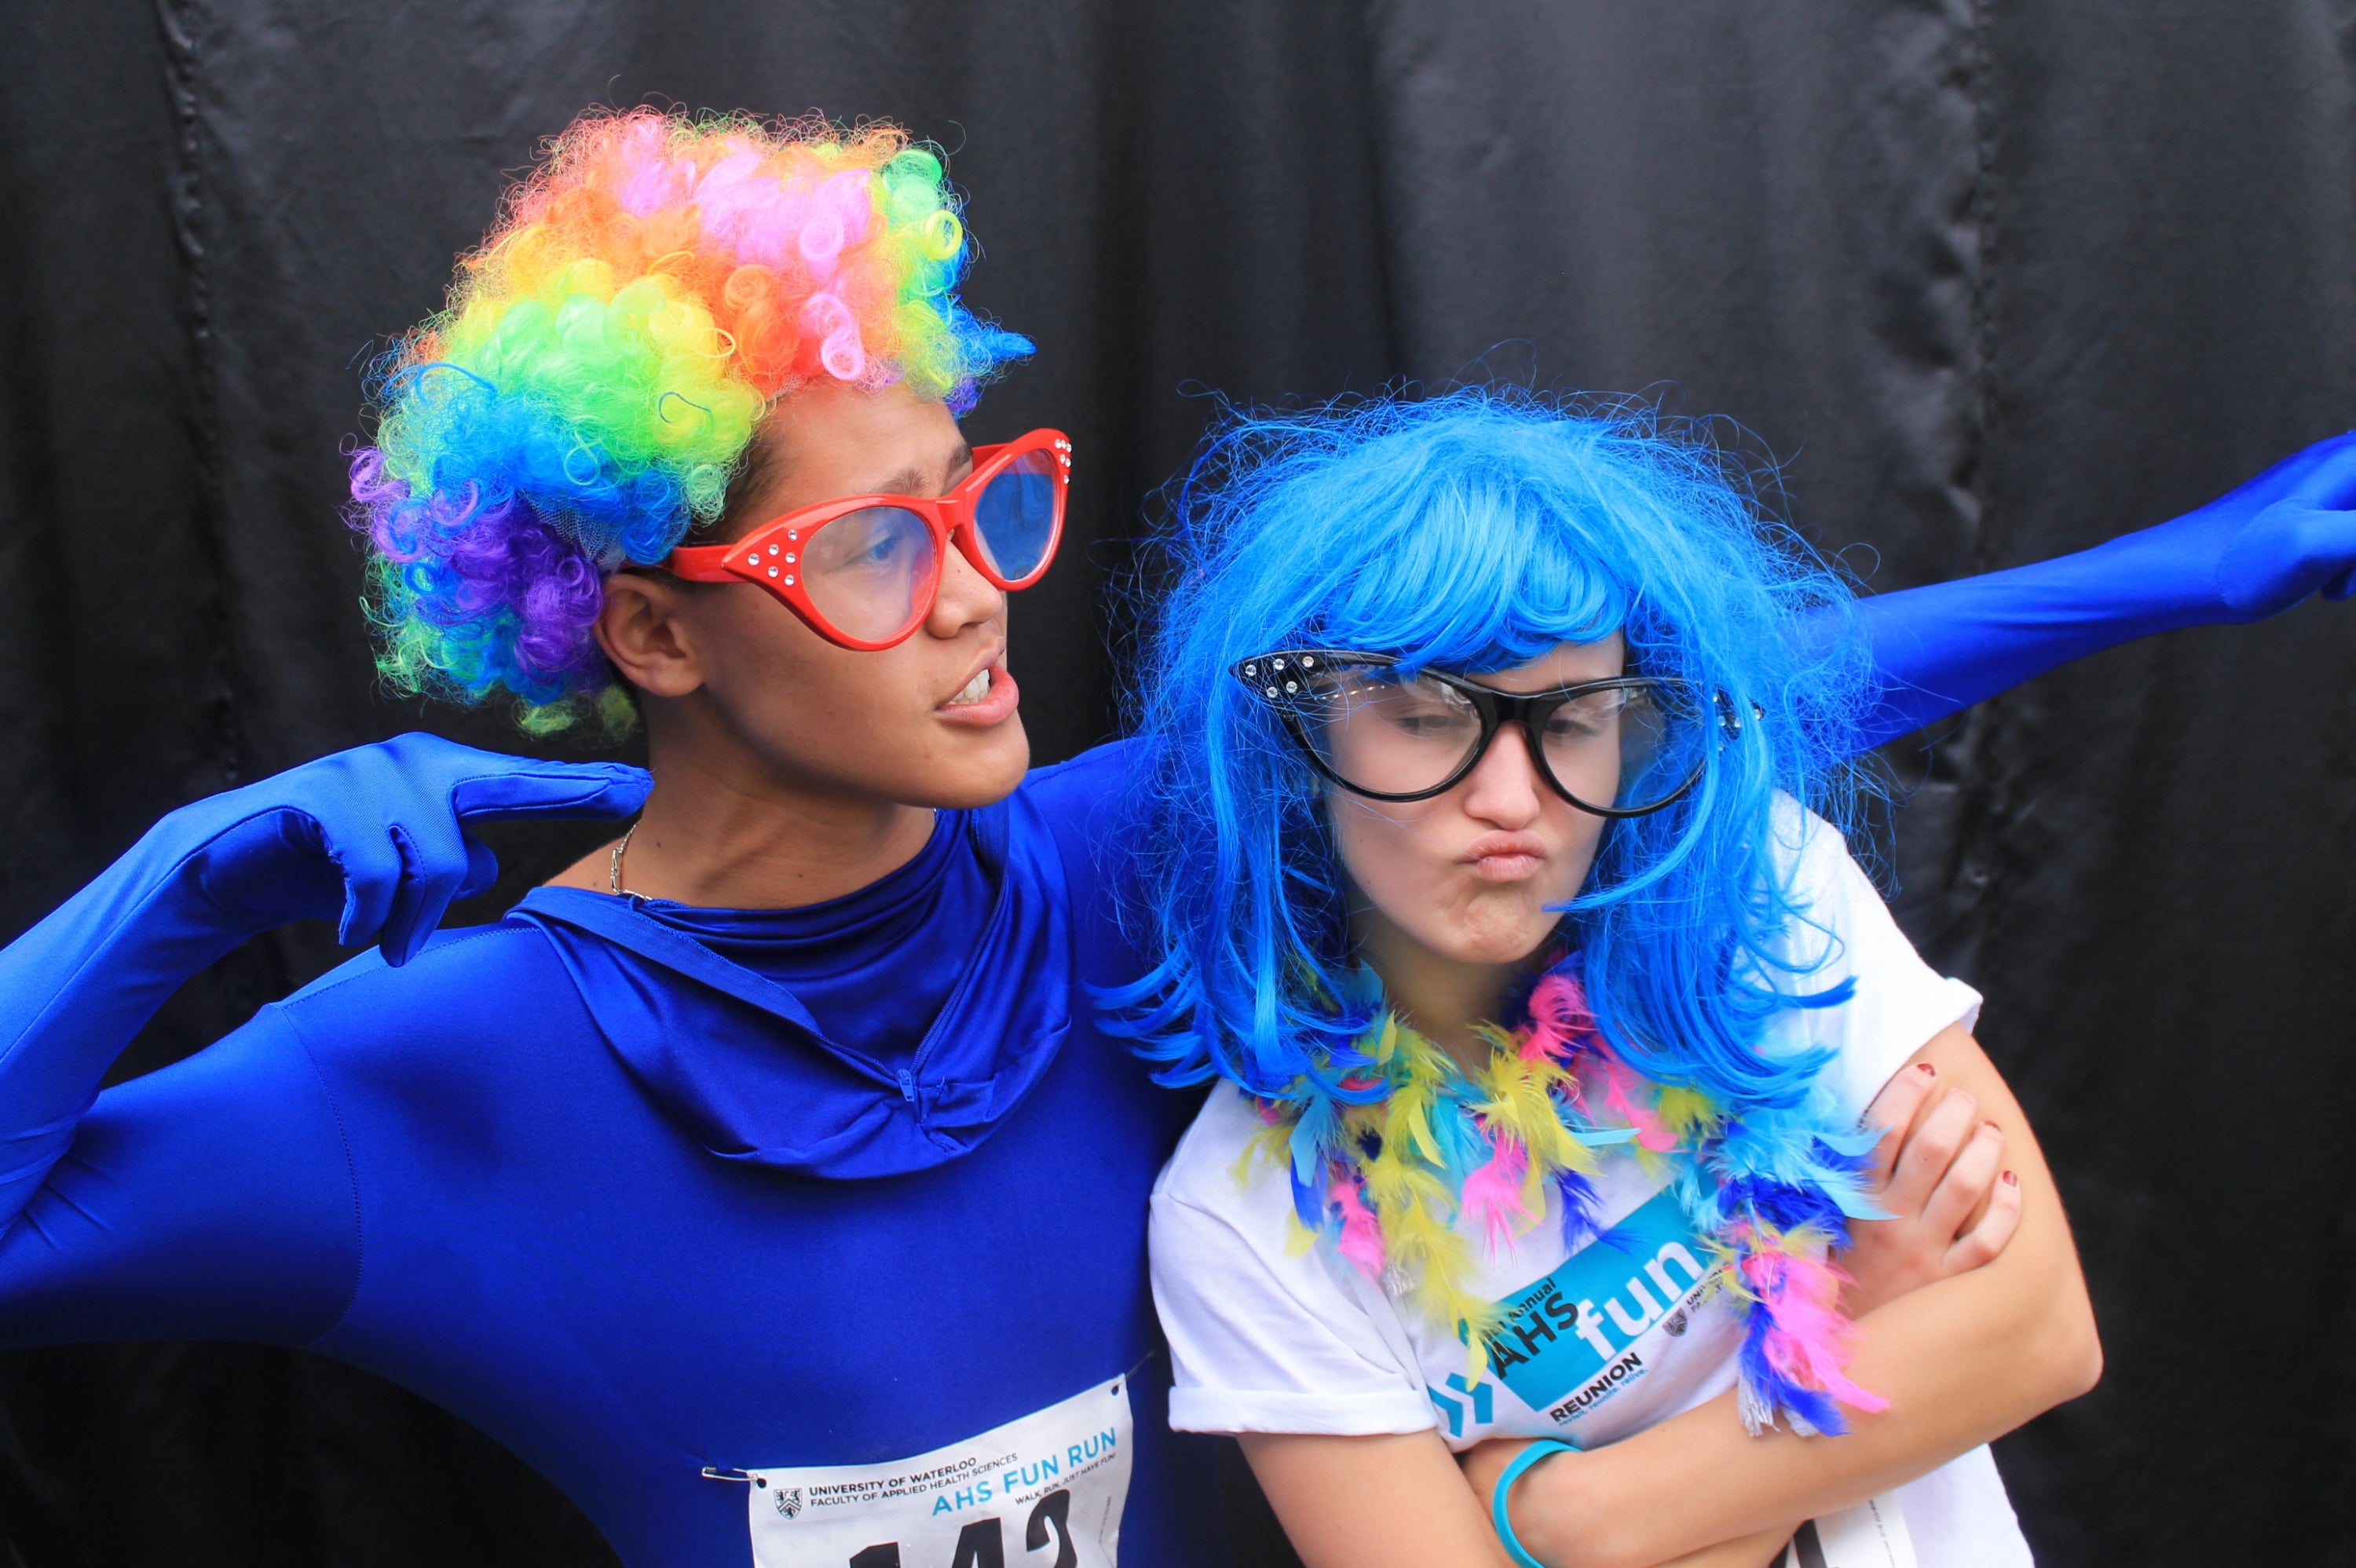 A man wearing a full blue body suit, overzised glasses and a wig while a woman is crossing her arms with glasses and a blue wig.